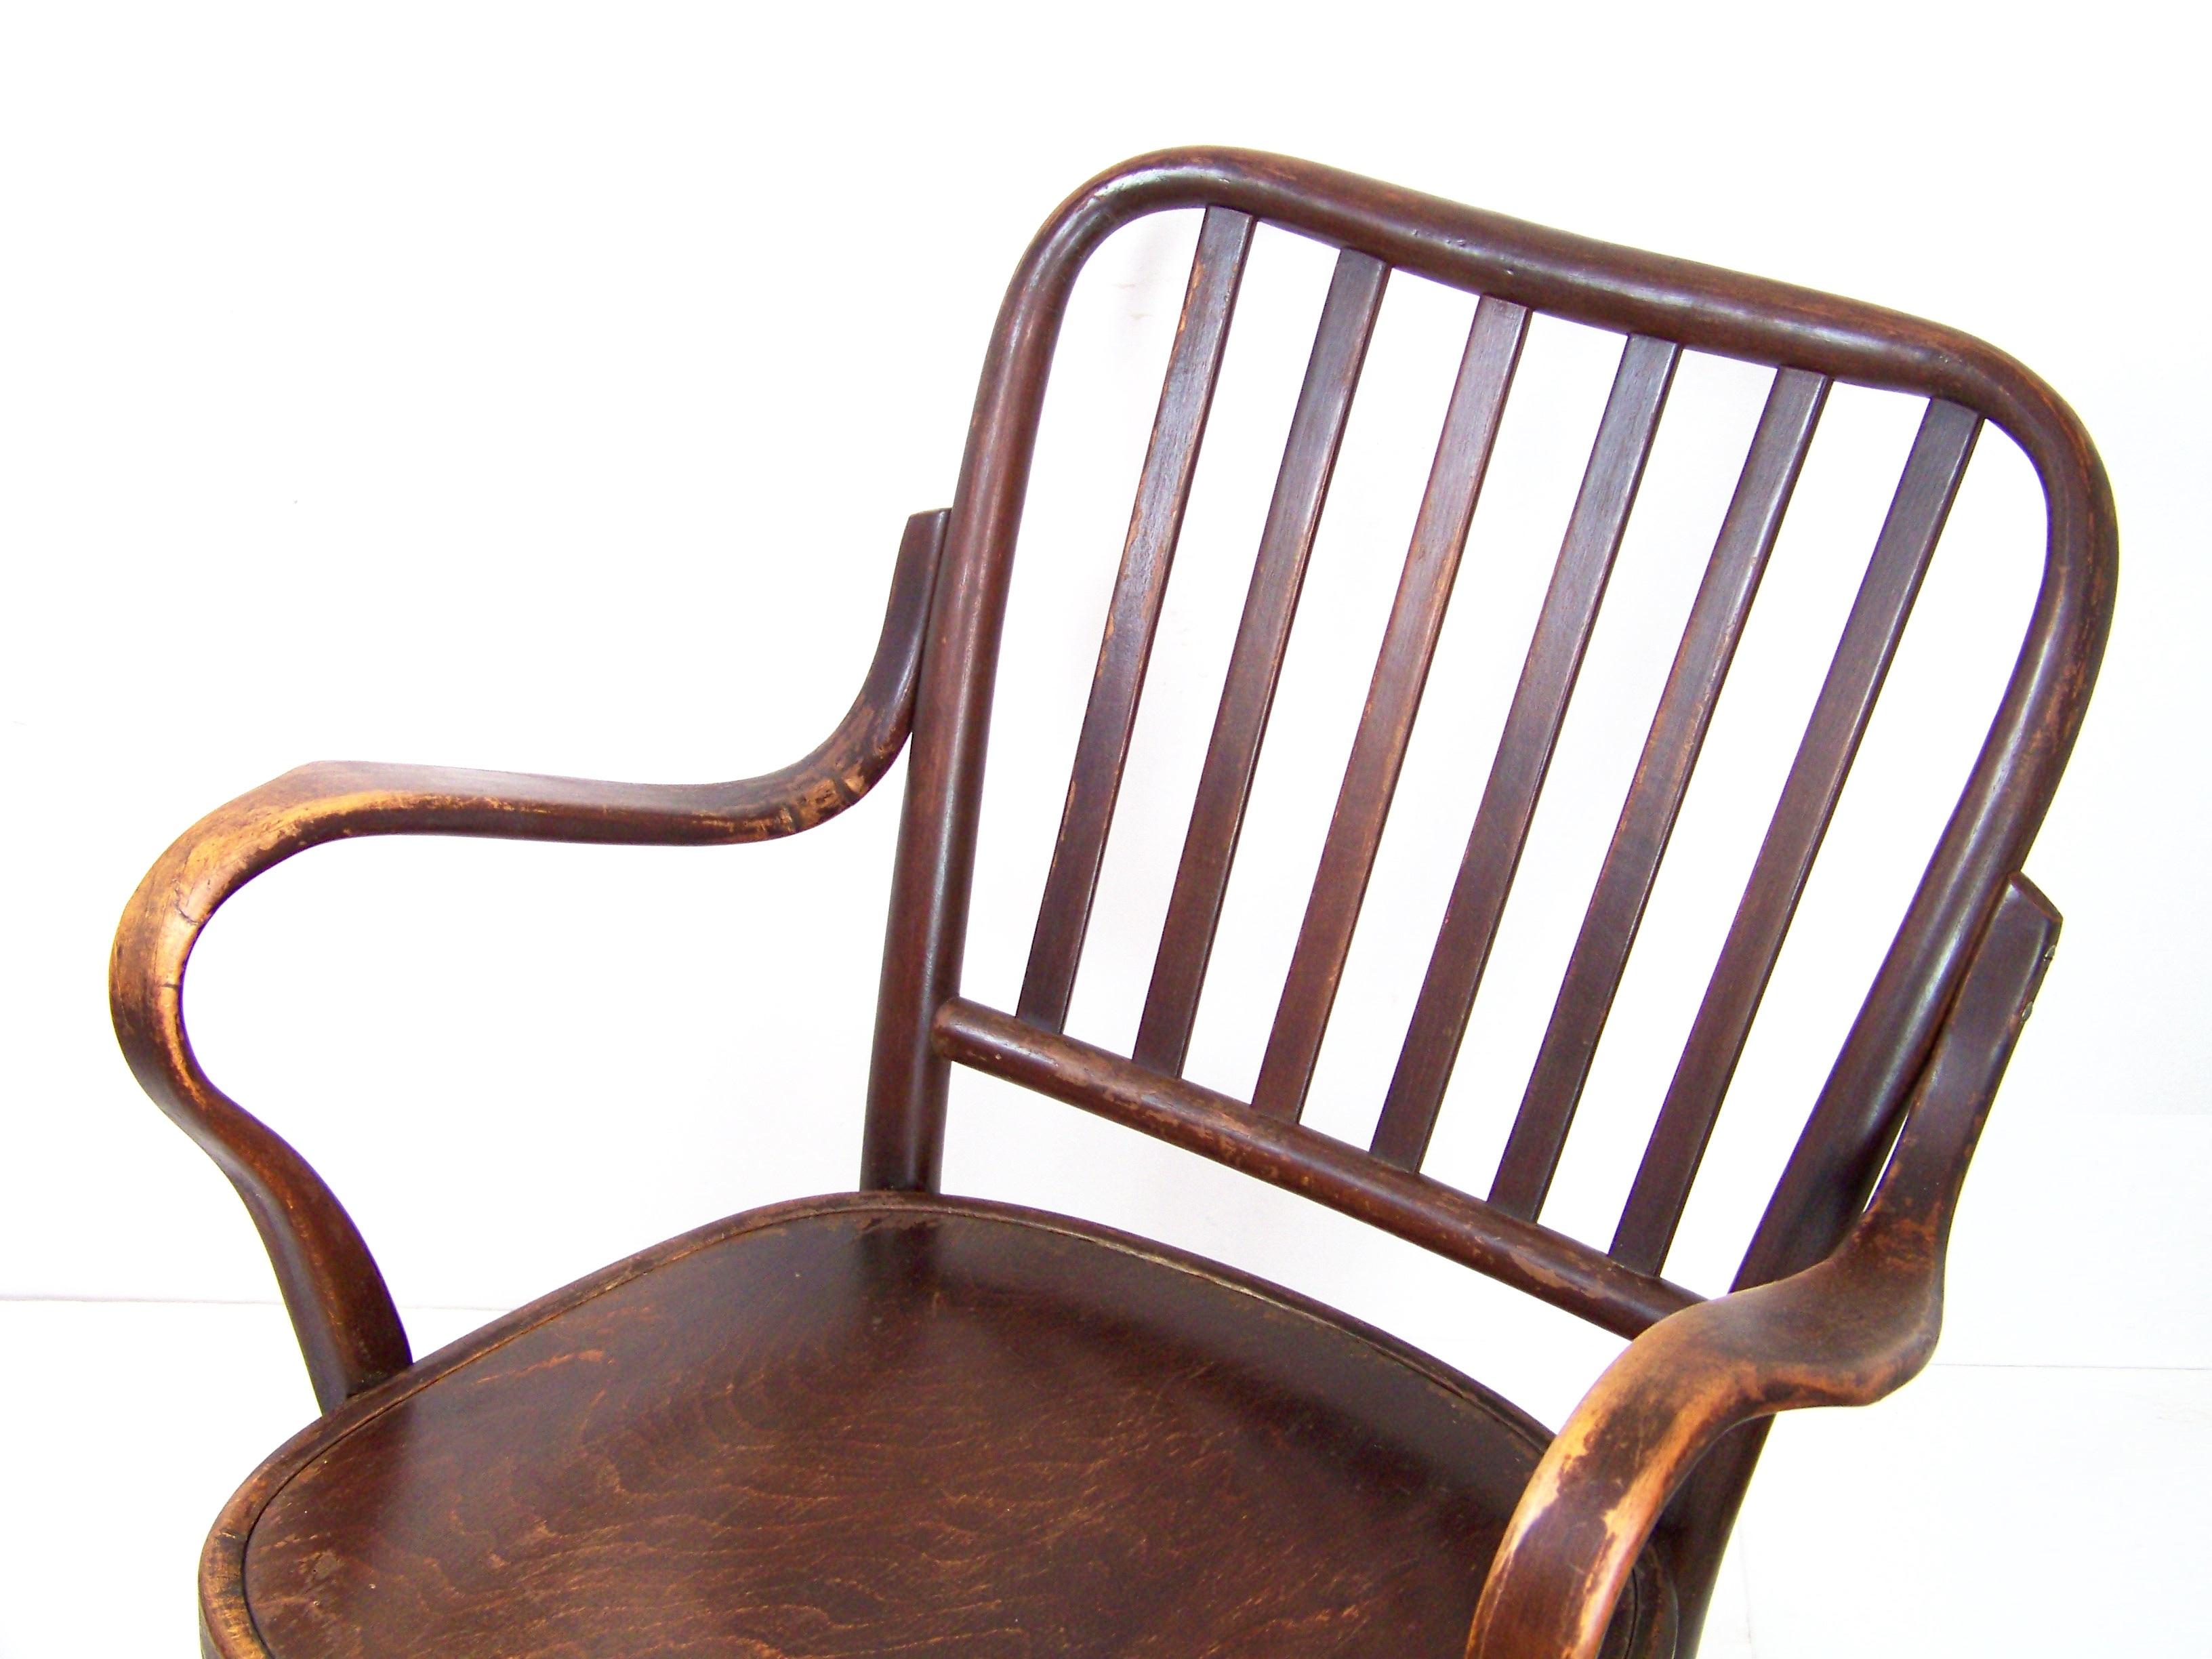 Designed by Frank Josef in year 1933. Original state with a pleasant patine of age. Cleaned and gentle re-polished with shellack finish. On the backrest were repaired cracks. Small traces of the already inactive worm infestation treated with